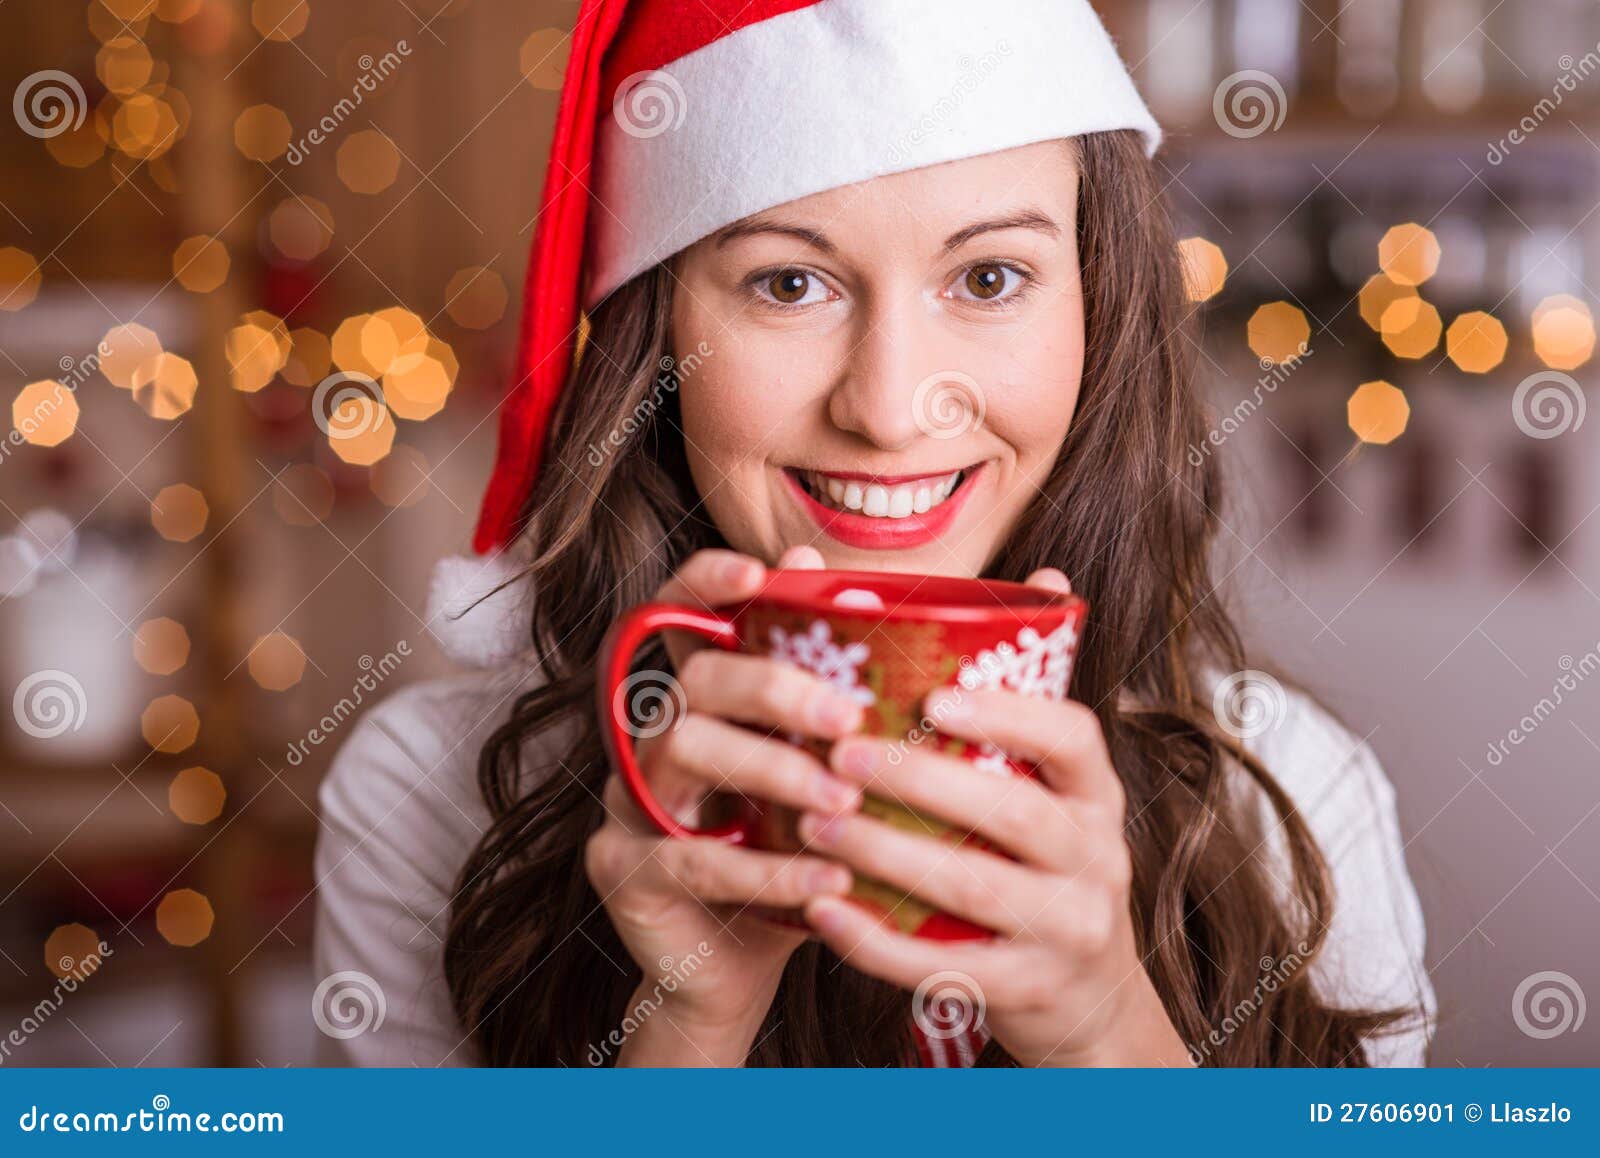 Young Girl Preparing for Christmas Stock Image - Image of happy ...